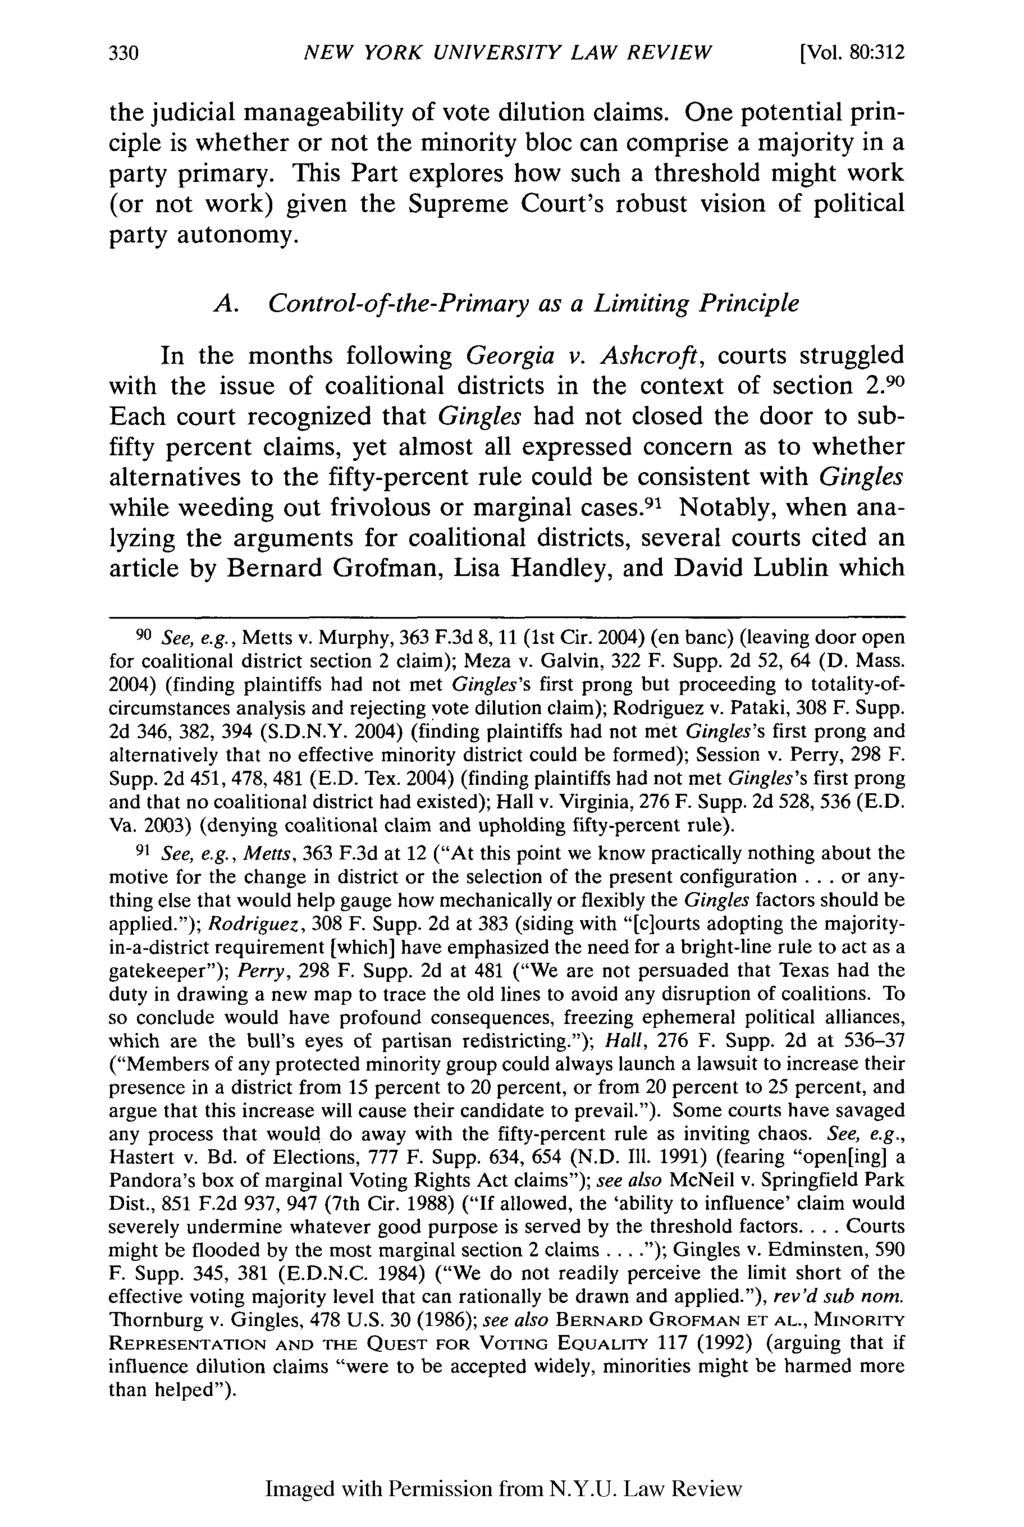 NEW YORK UNIVERSITY LAW REVIEW [Vol. 80:312 the judicial manageability of vote dilution claims. One potential principle is whether or not the minority bloc can comprise a majority in a party primary.